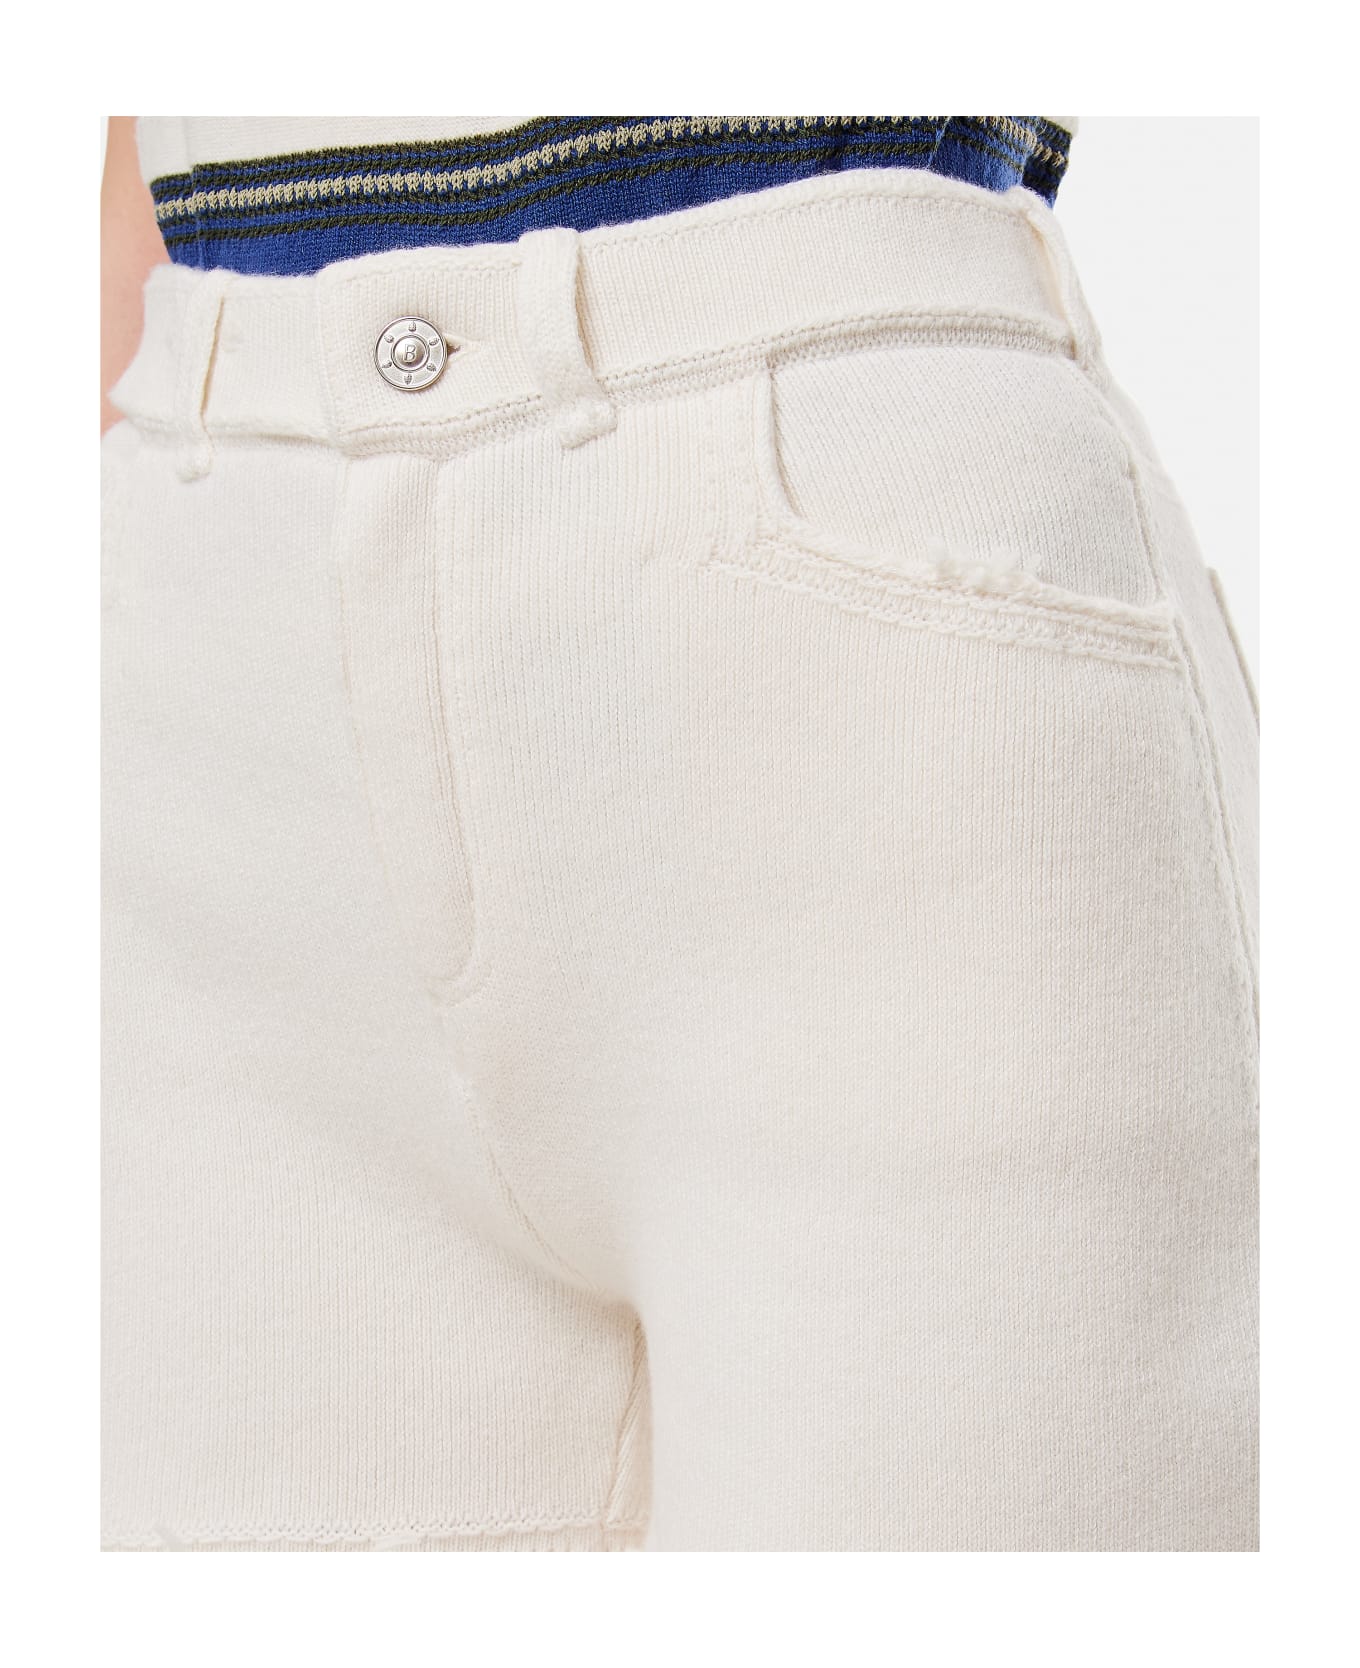 Barrie Cashmere Shorts - White